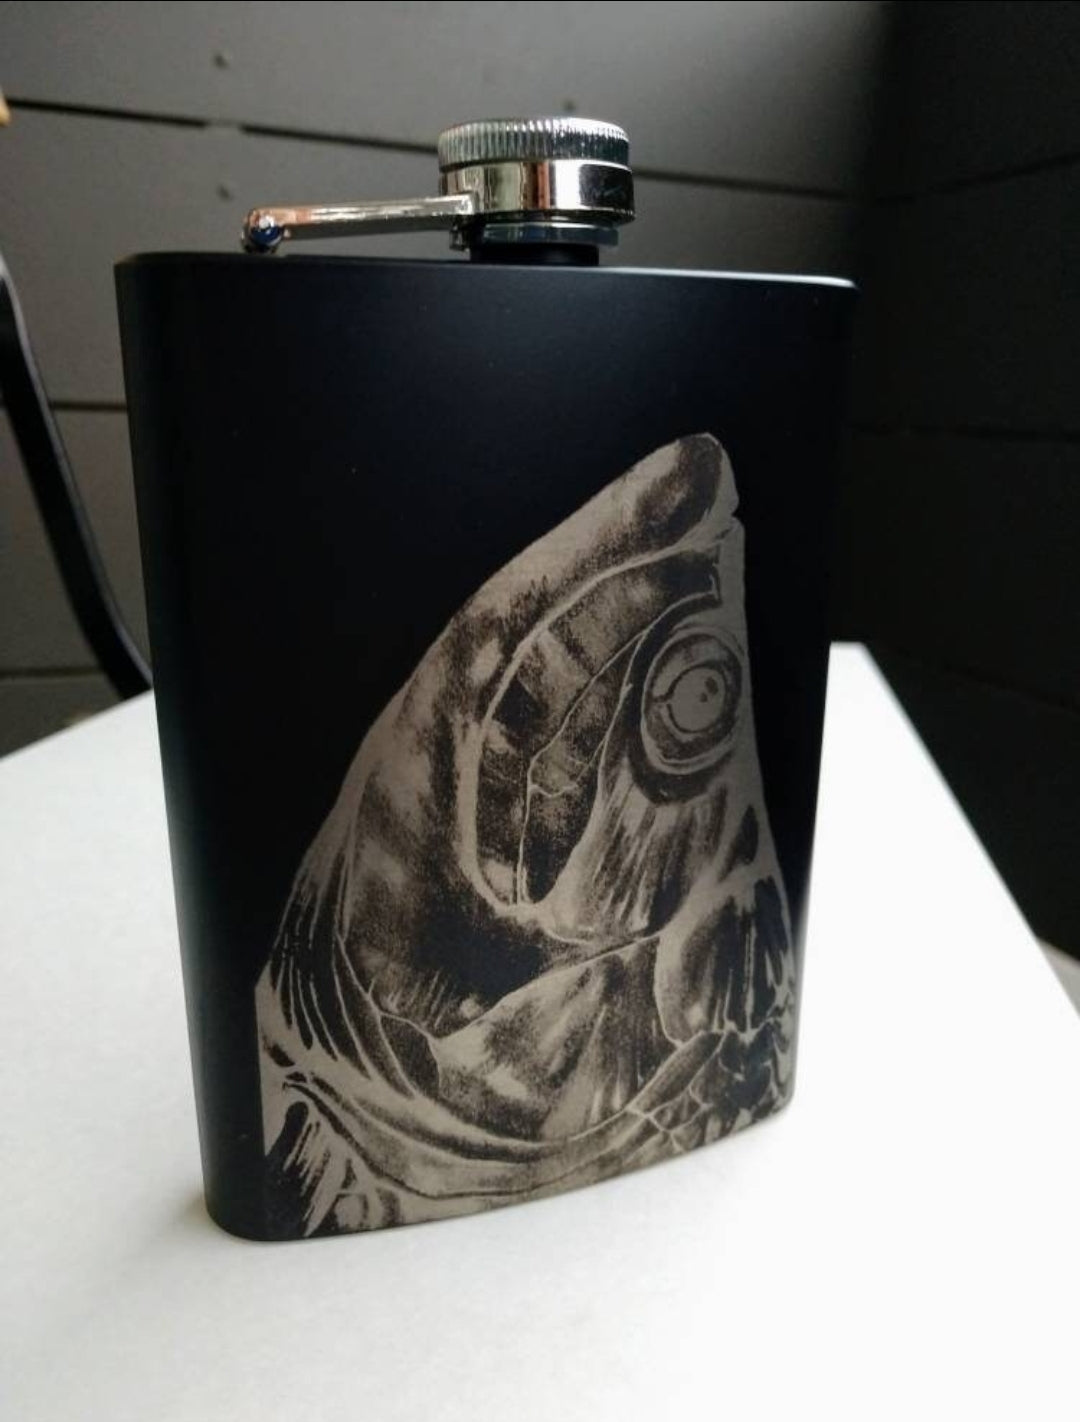 Metal beverage hip flask 8 oz. Black with Fish head themed image